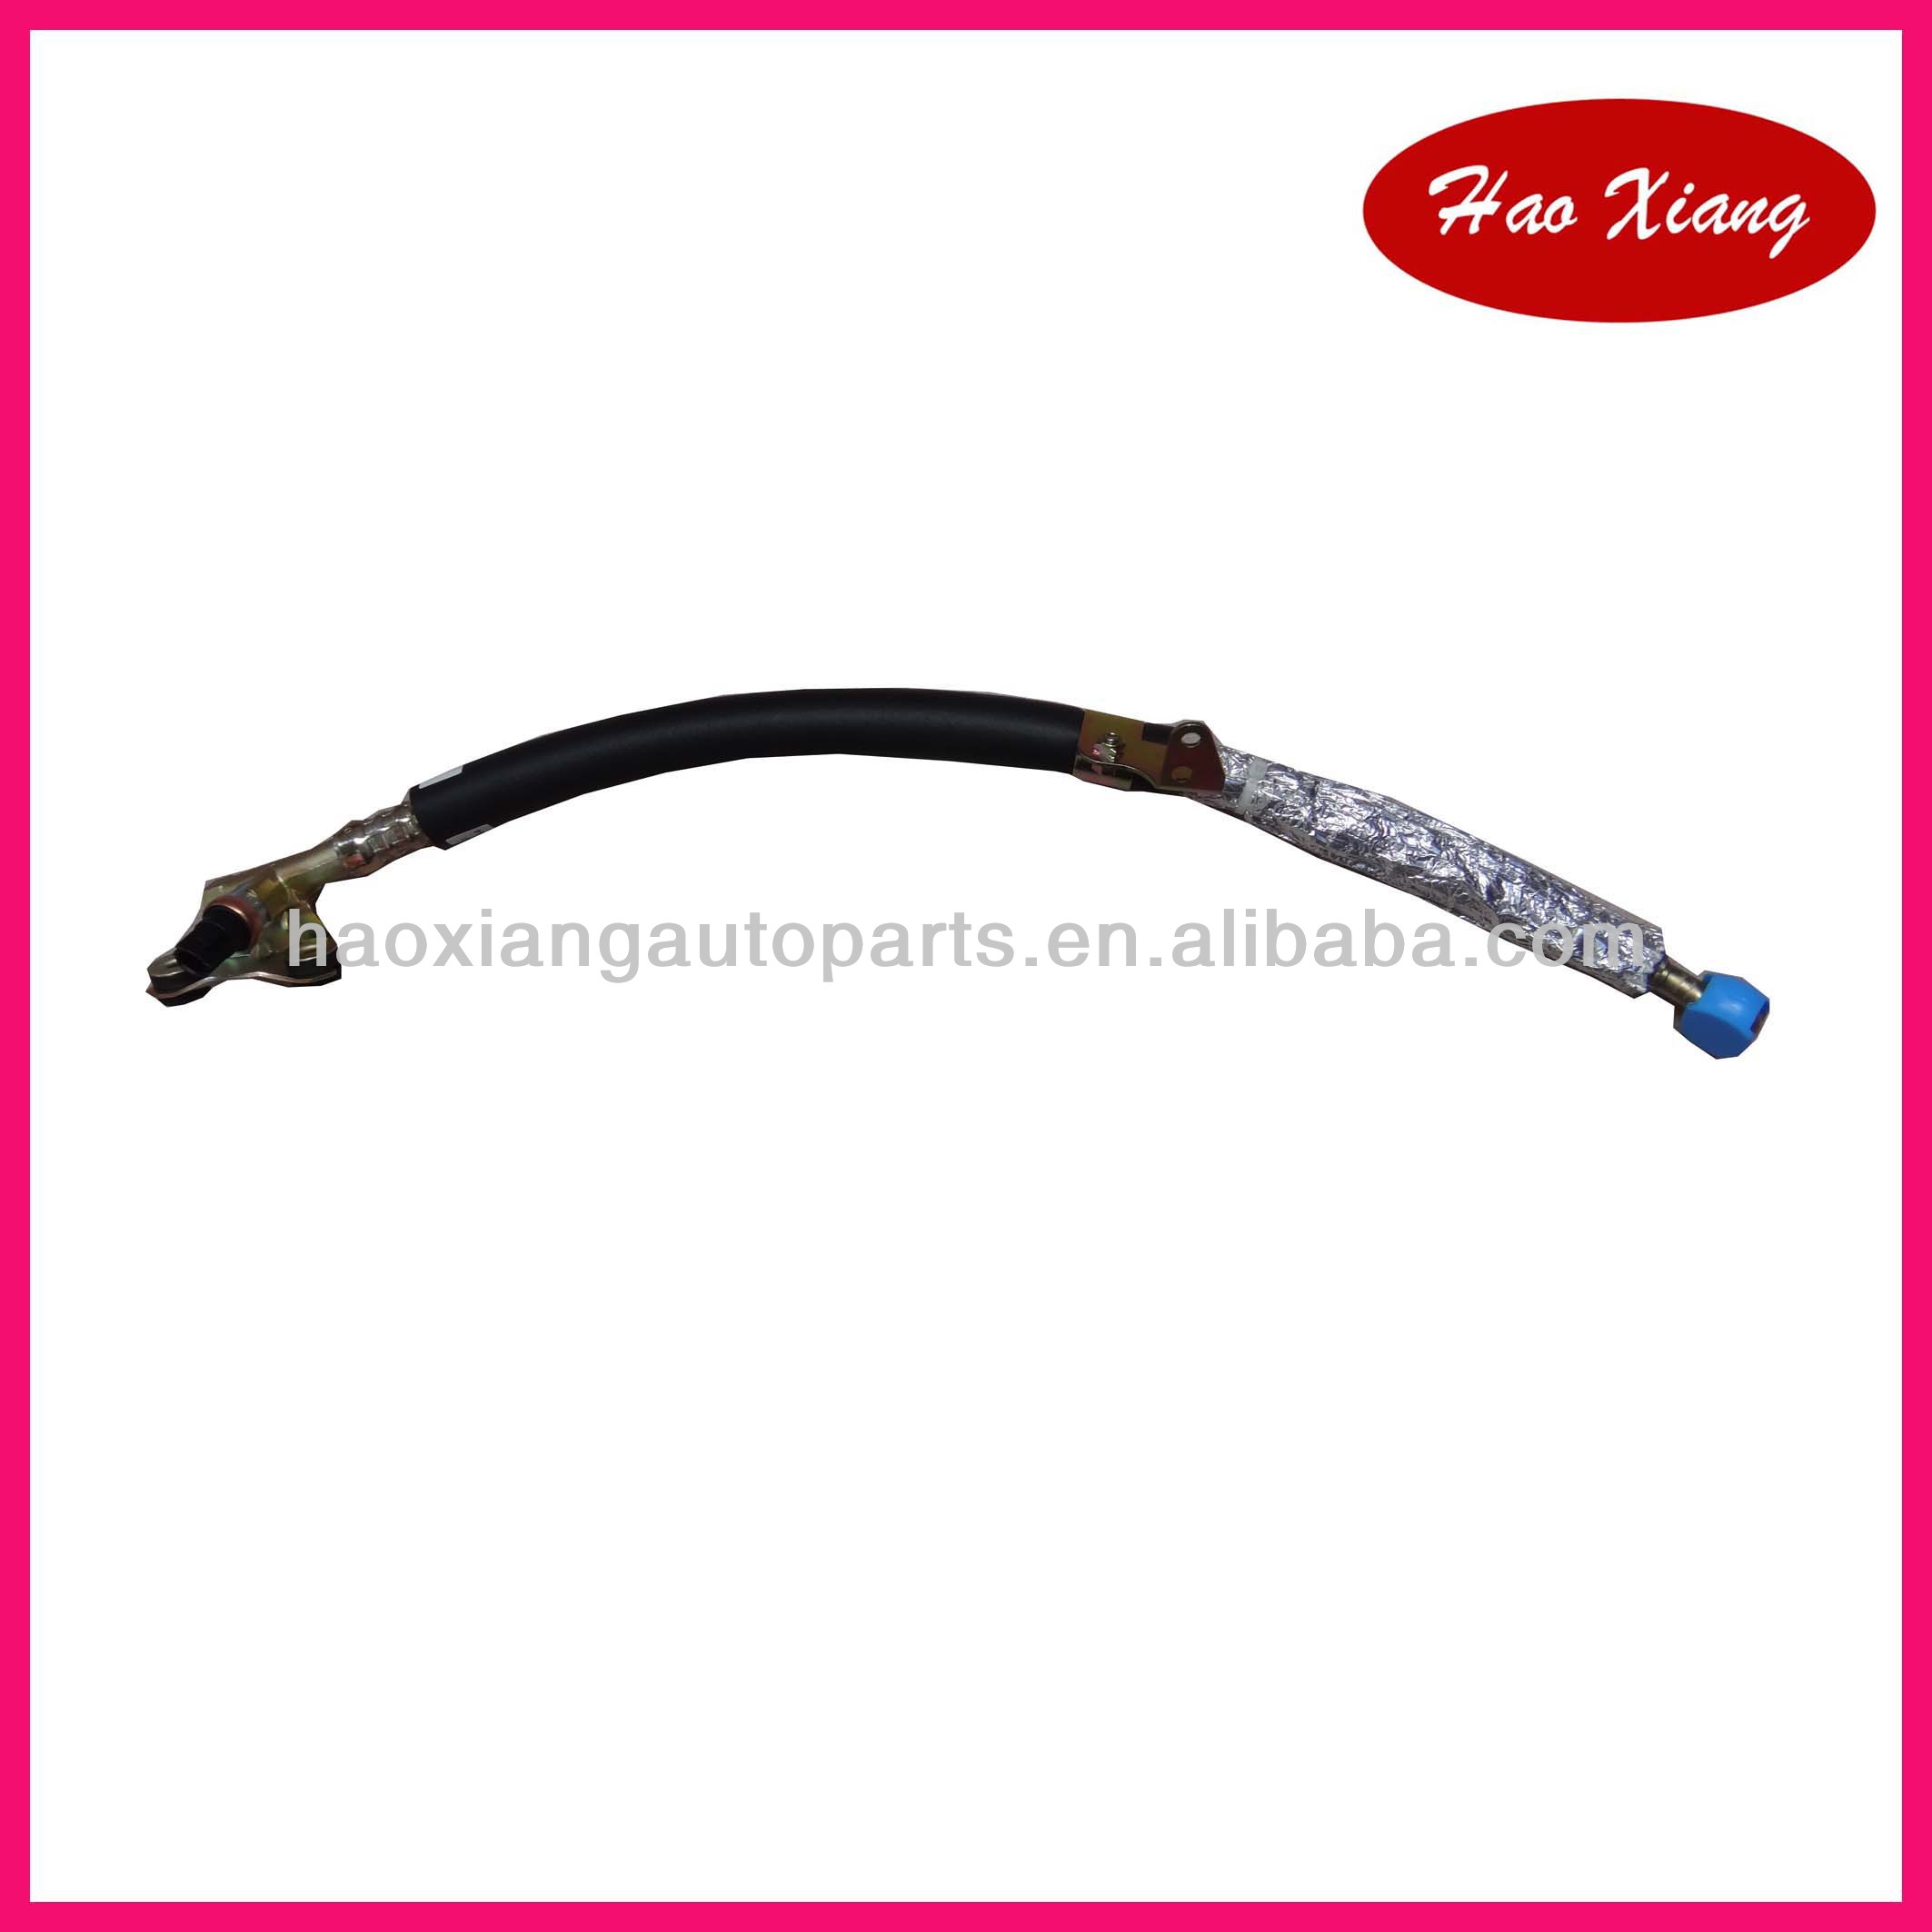 Power steering hose for a 2000 nissan maxima #4